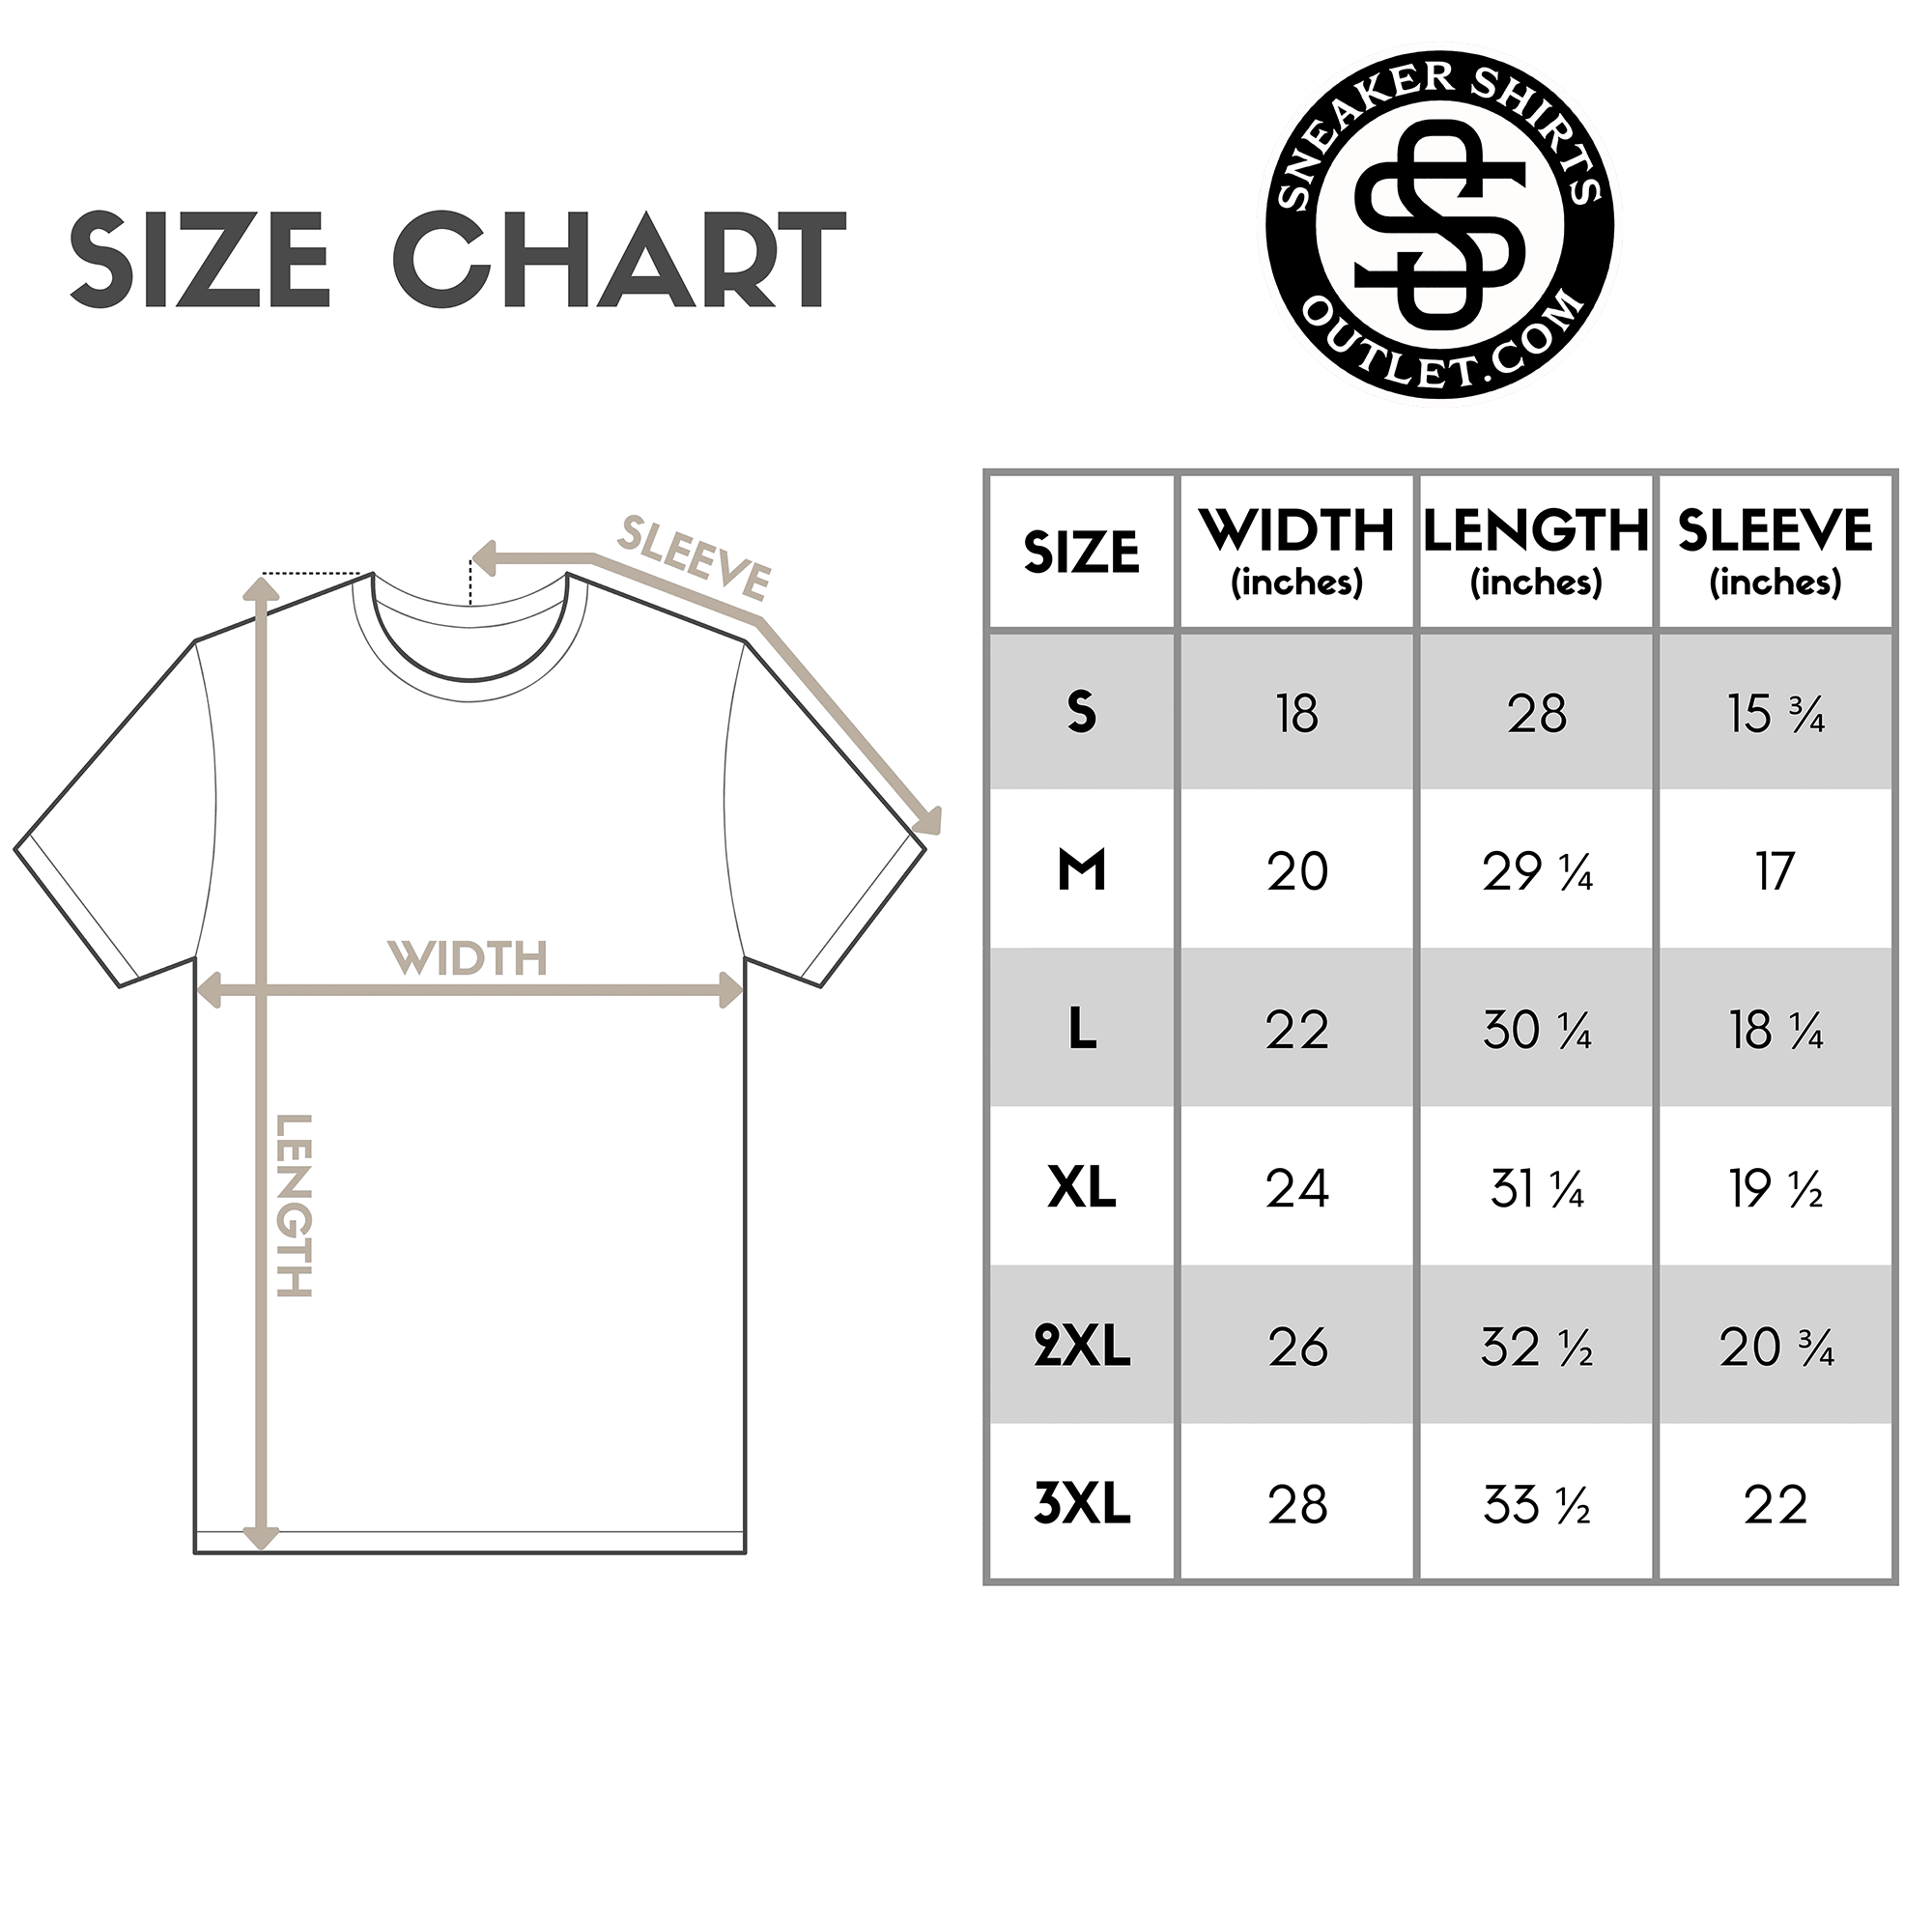 size chart Secure The Bag Shirt Nike Dunks Low Undefeated 5 On It Dunk vs AF1 photo